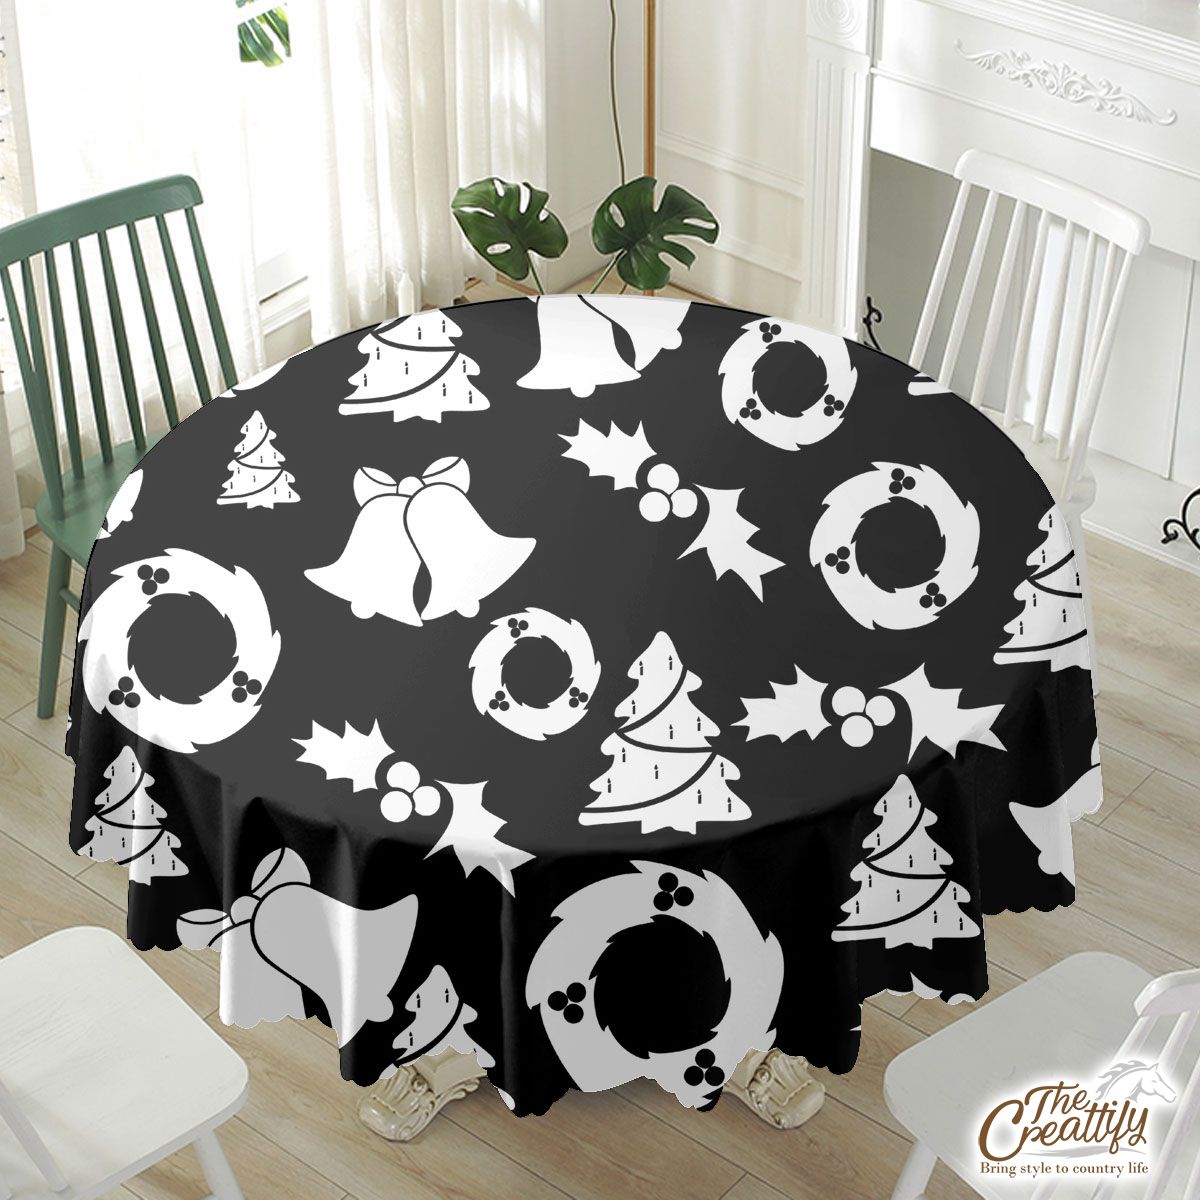 Christmas Wreath, Holly Leaf, Pine Tree And Bells On Black Waterproof Tablecloth